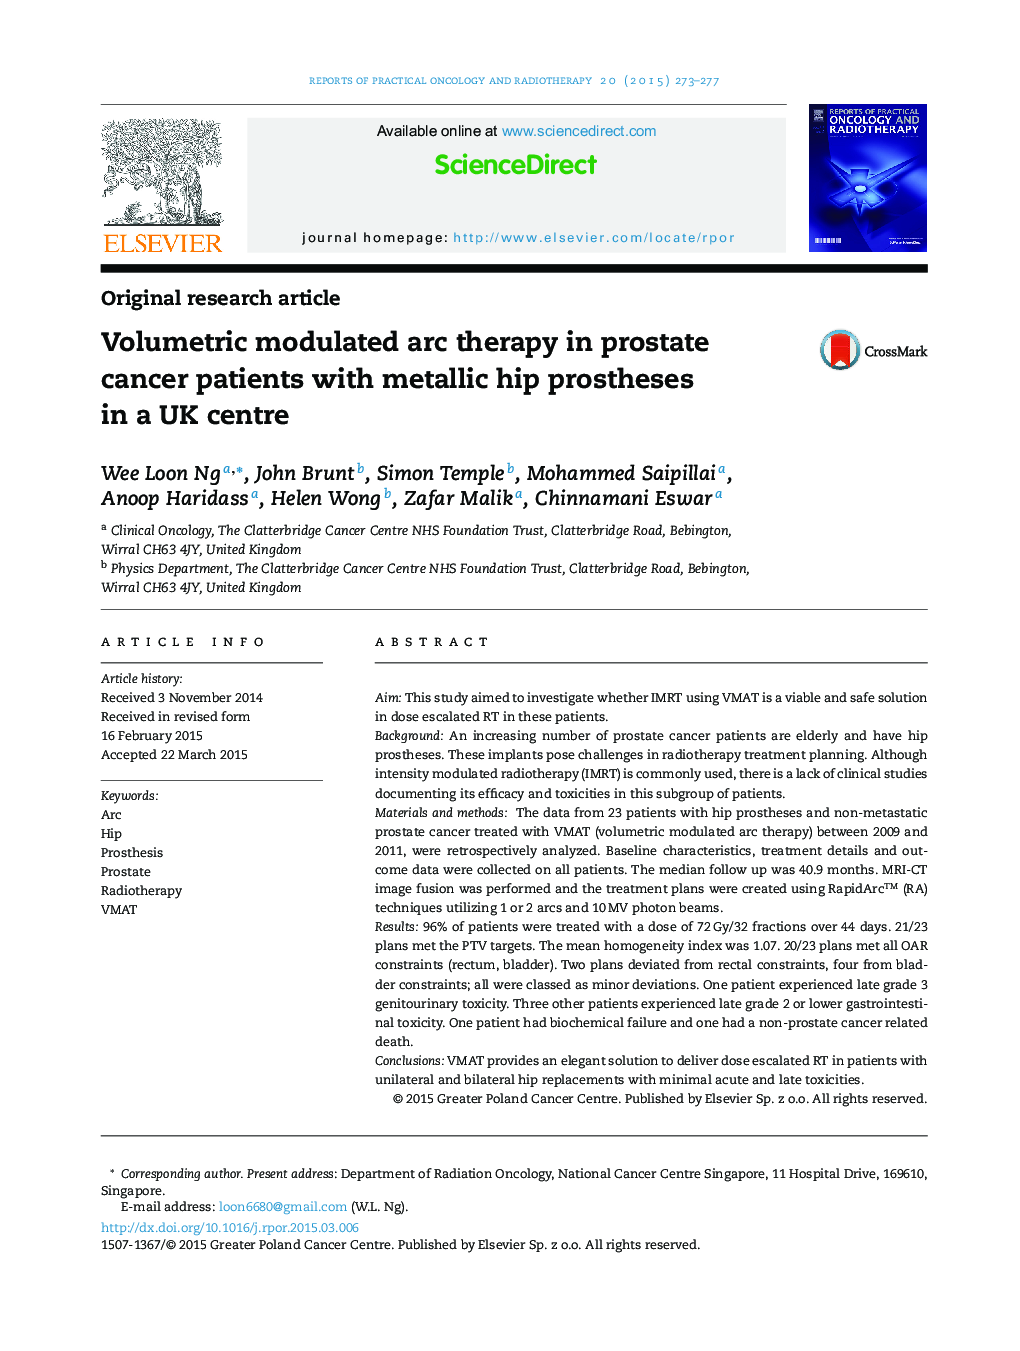 Volumetric modulated arc therapy in prostate cancer patients with metallic hip prostheses in a UK centre